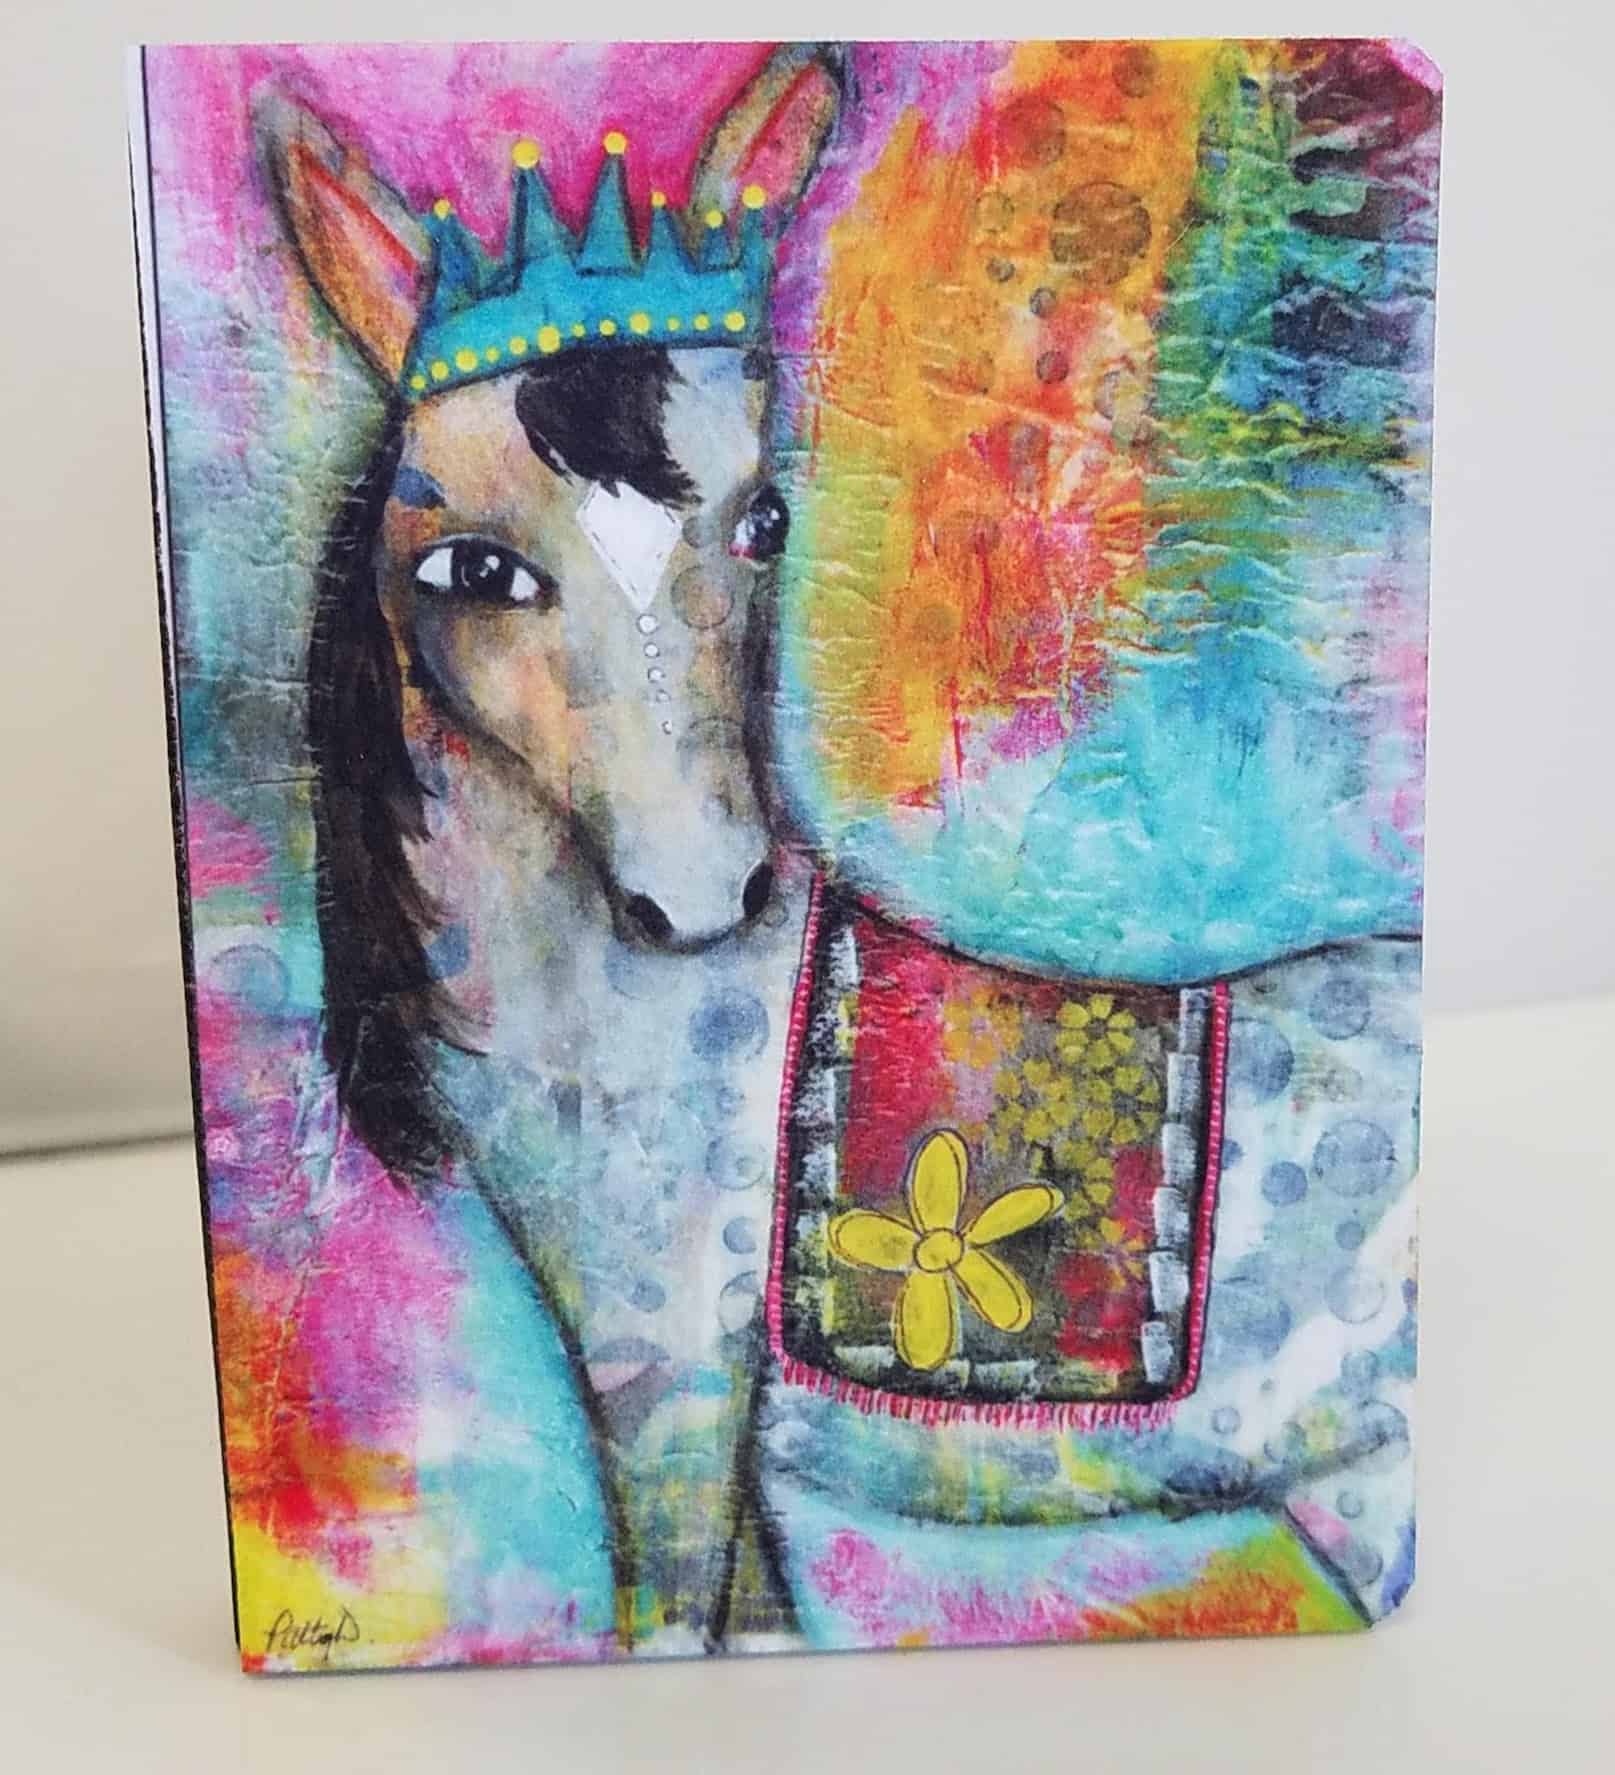 This "Painted Pony" Crowned Critter, Small Blank Journal for notes, lists, sketching and planning is made with love by Studio Patty D! Shop more unique gift ideas today with Spots Initiatives, the best way to support creators.